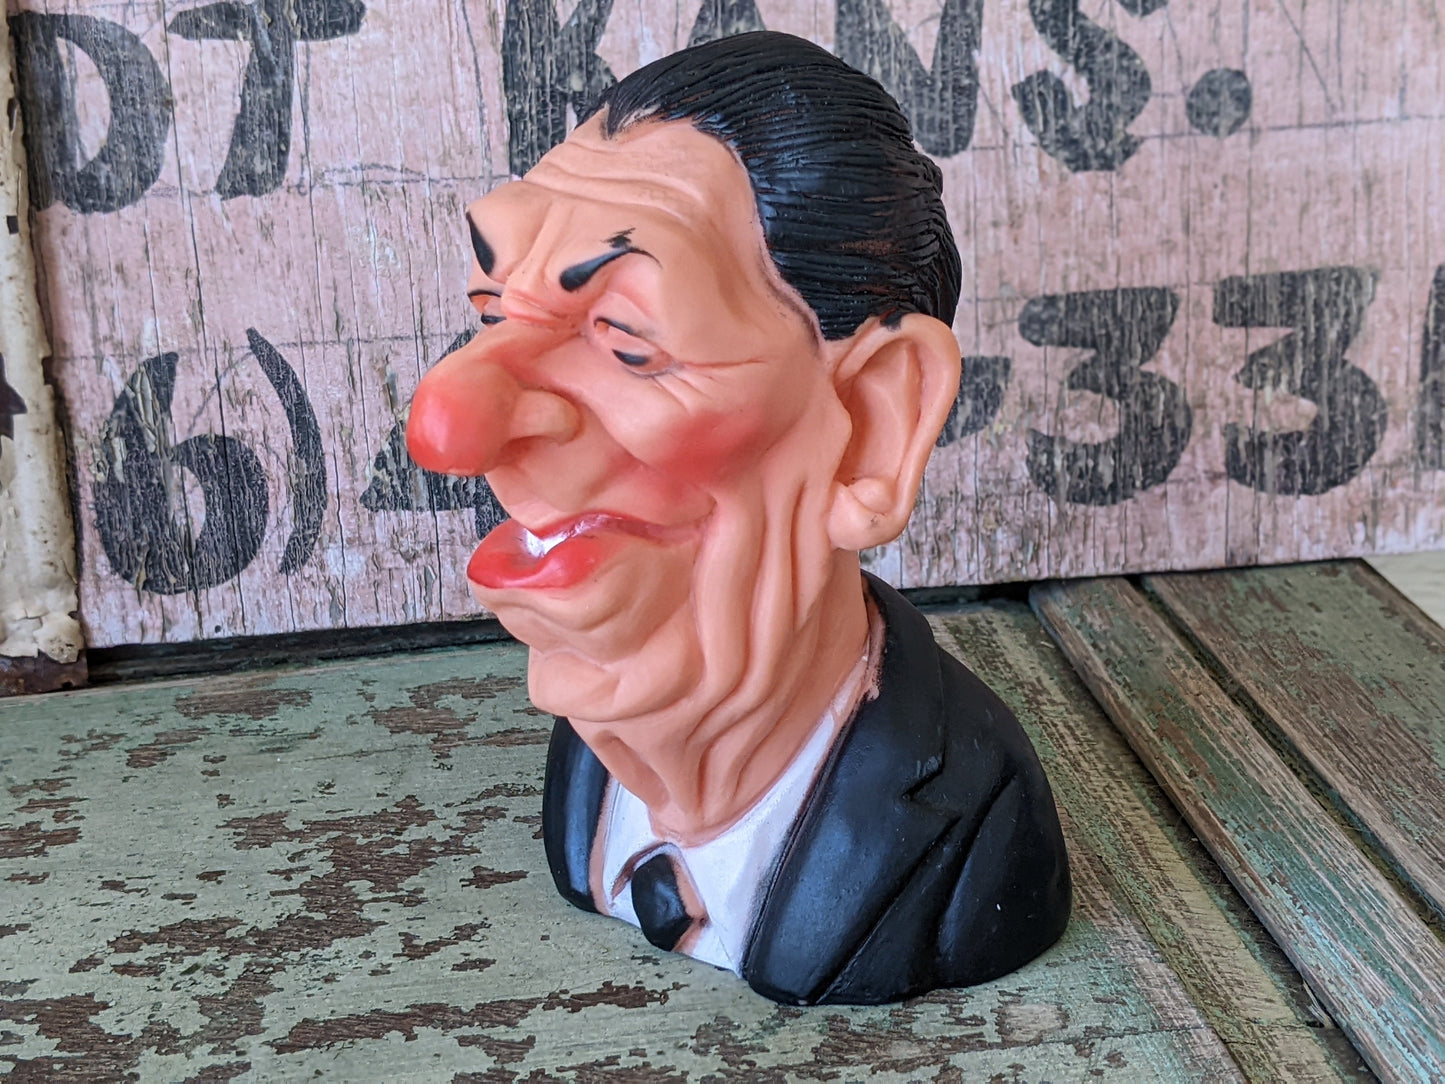 1984 Original Ronald Reagan Rubber Doggy Squeaker Toy by Spitting Image Original !! Awesome Vintage Gifts & Collectibles !!